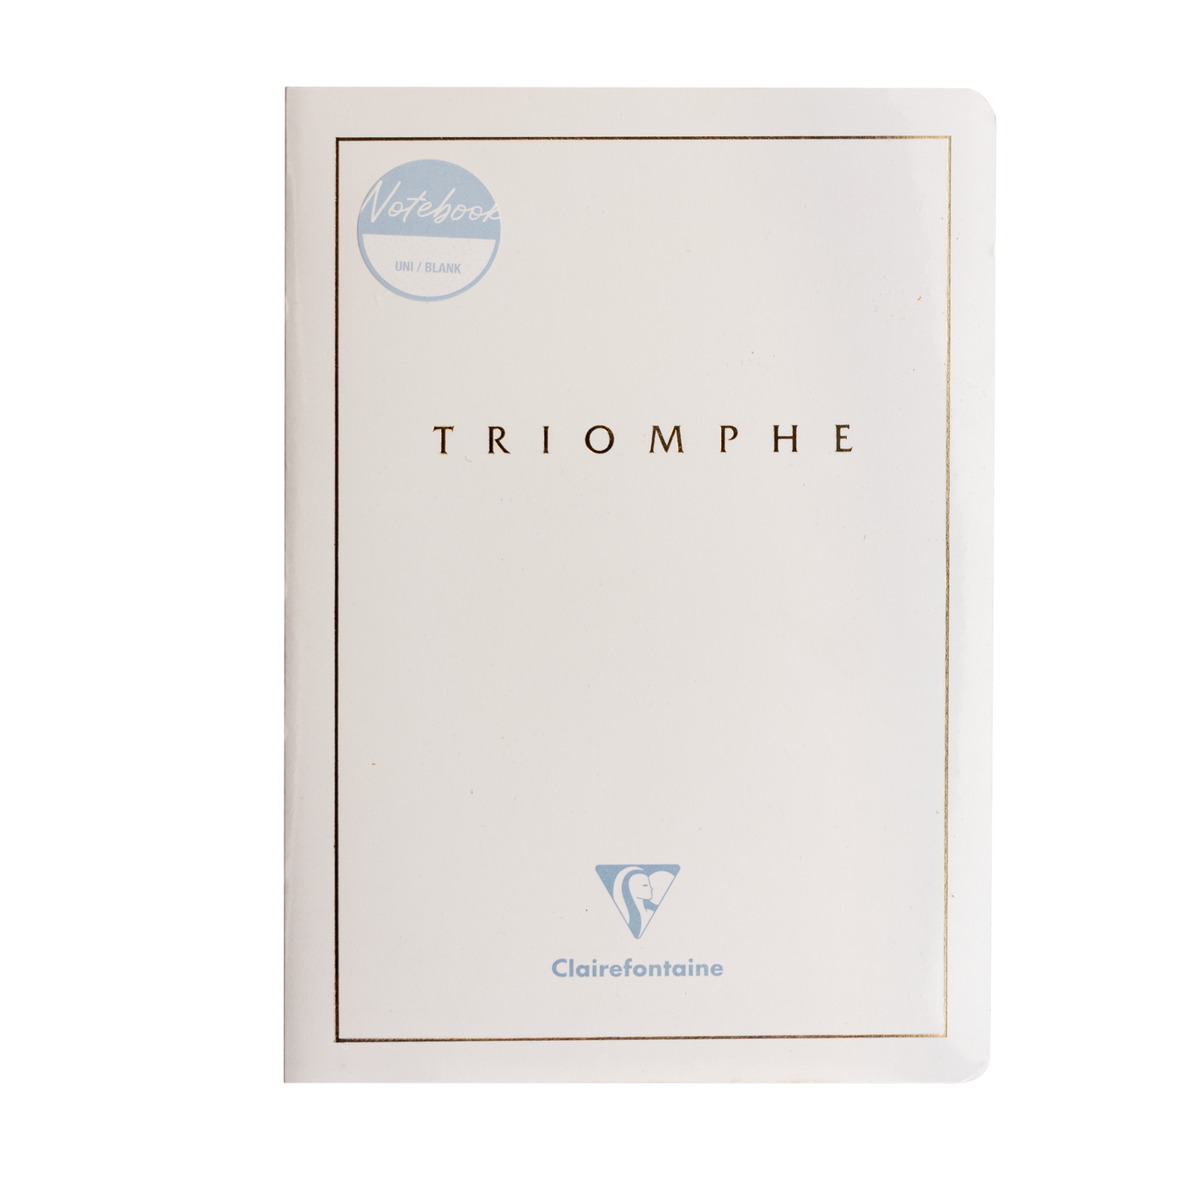 Clairefontaine Triomphe A5 Uni/Blank Notebook - White